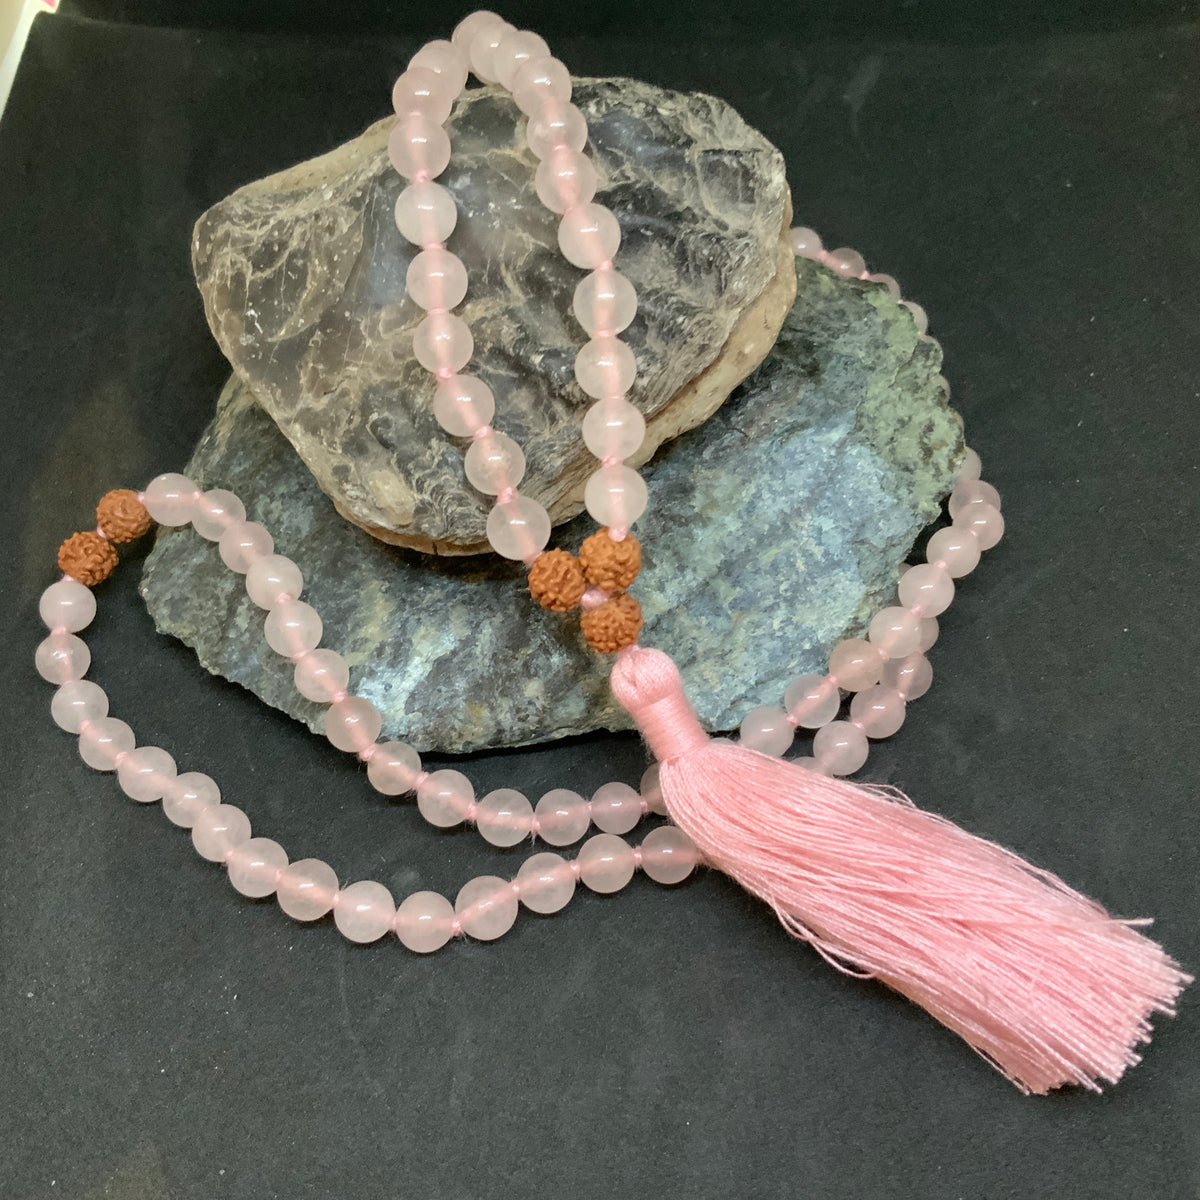 Load image into Gallery viewer, Ascension Wisdom Mala
